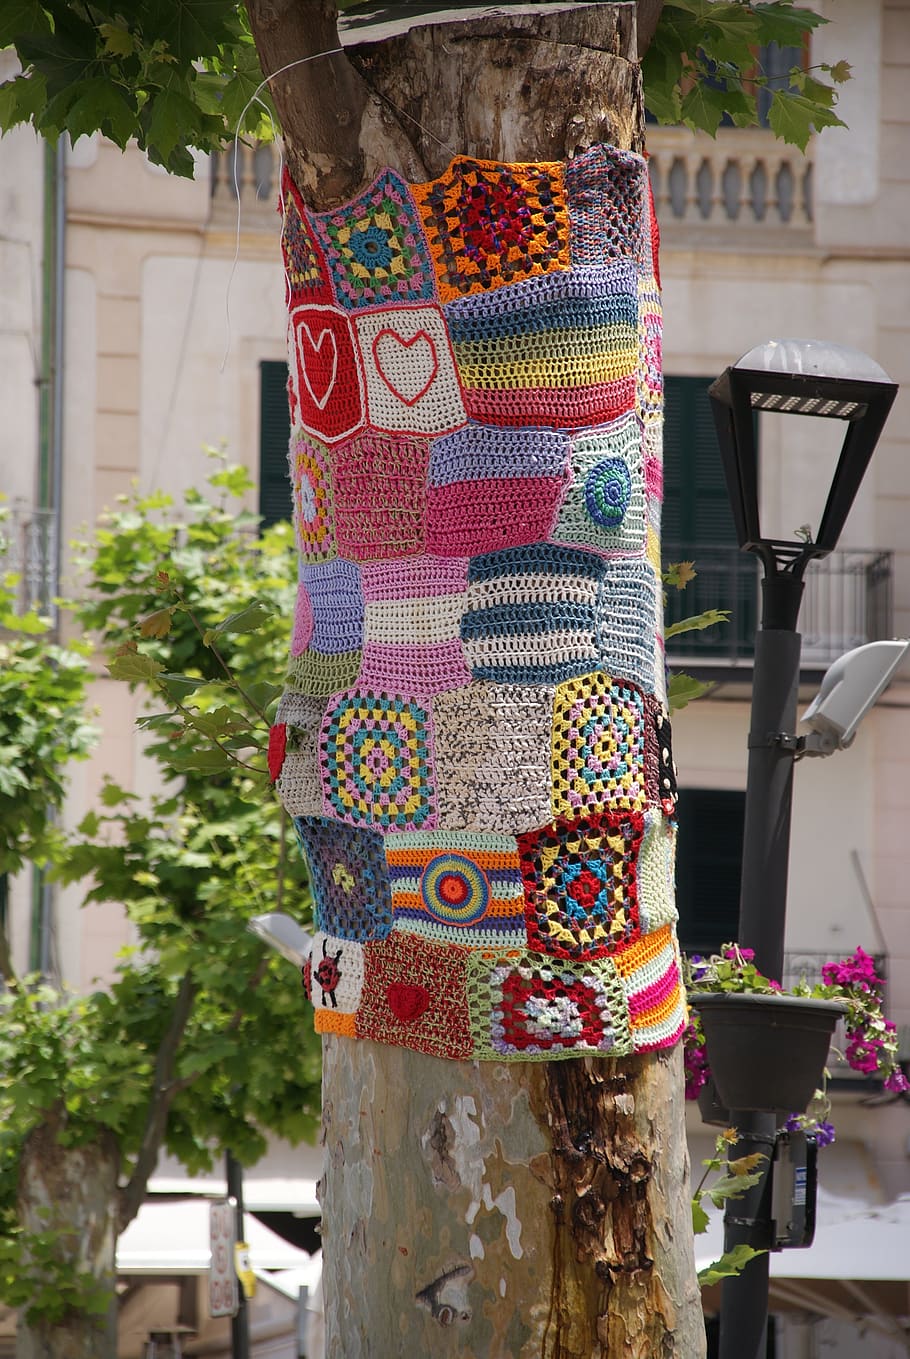 tree, guerrilla crochet, mallorca, crochet, beautification, hand labor, crafted nature, multi colored, focus on foreground, day